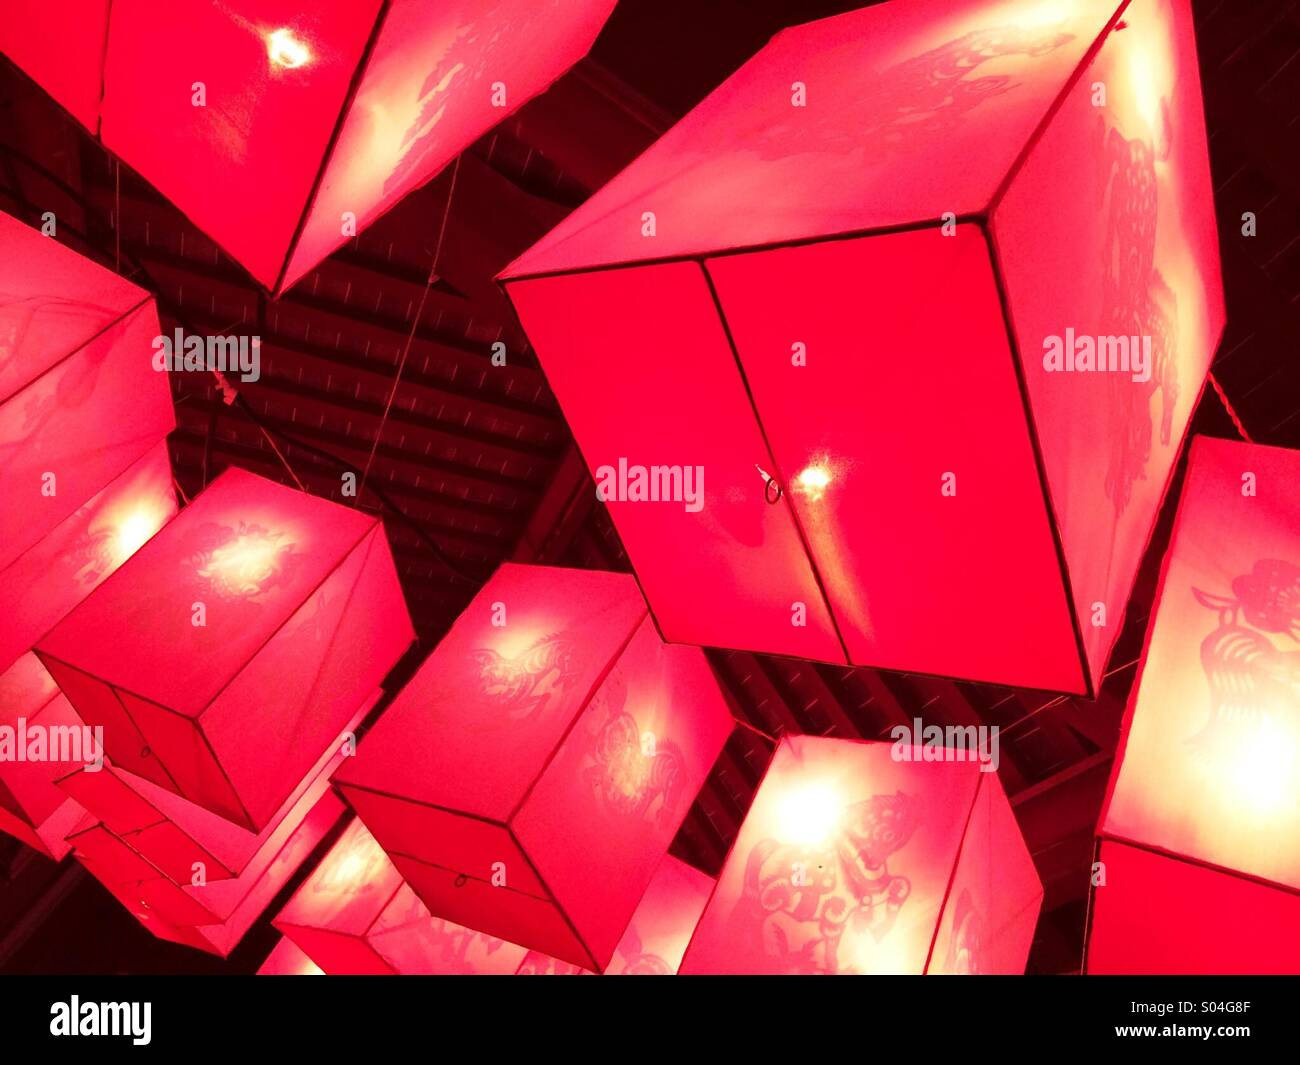 Red decorative cubes. Stock Photo